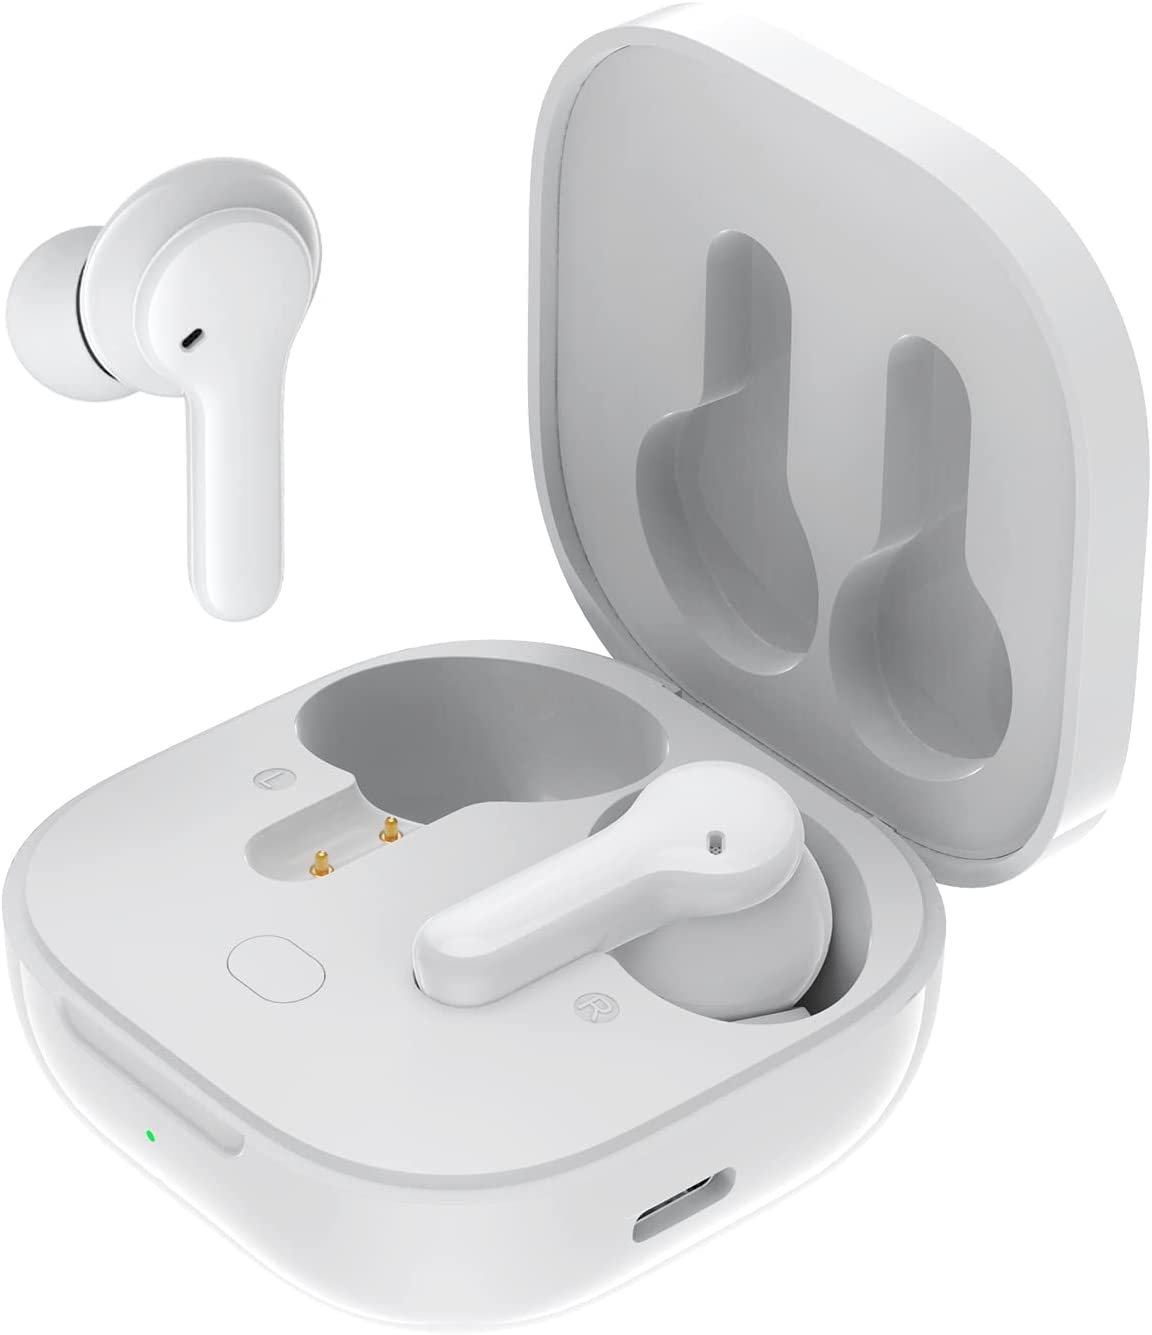 QCY T13 ANC True Wireless Bluetooth Earbuds - White